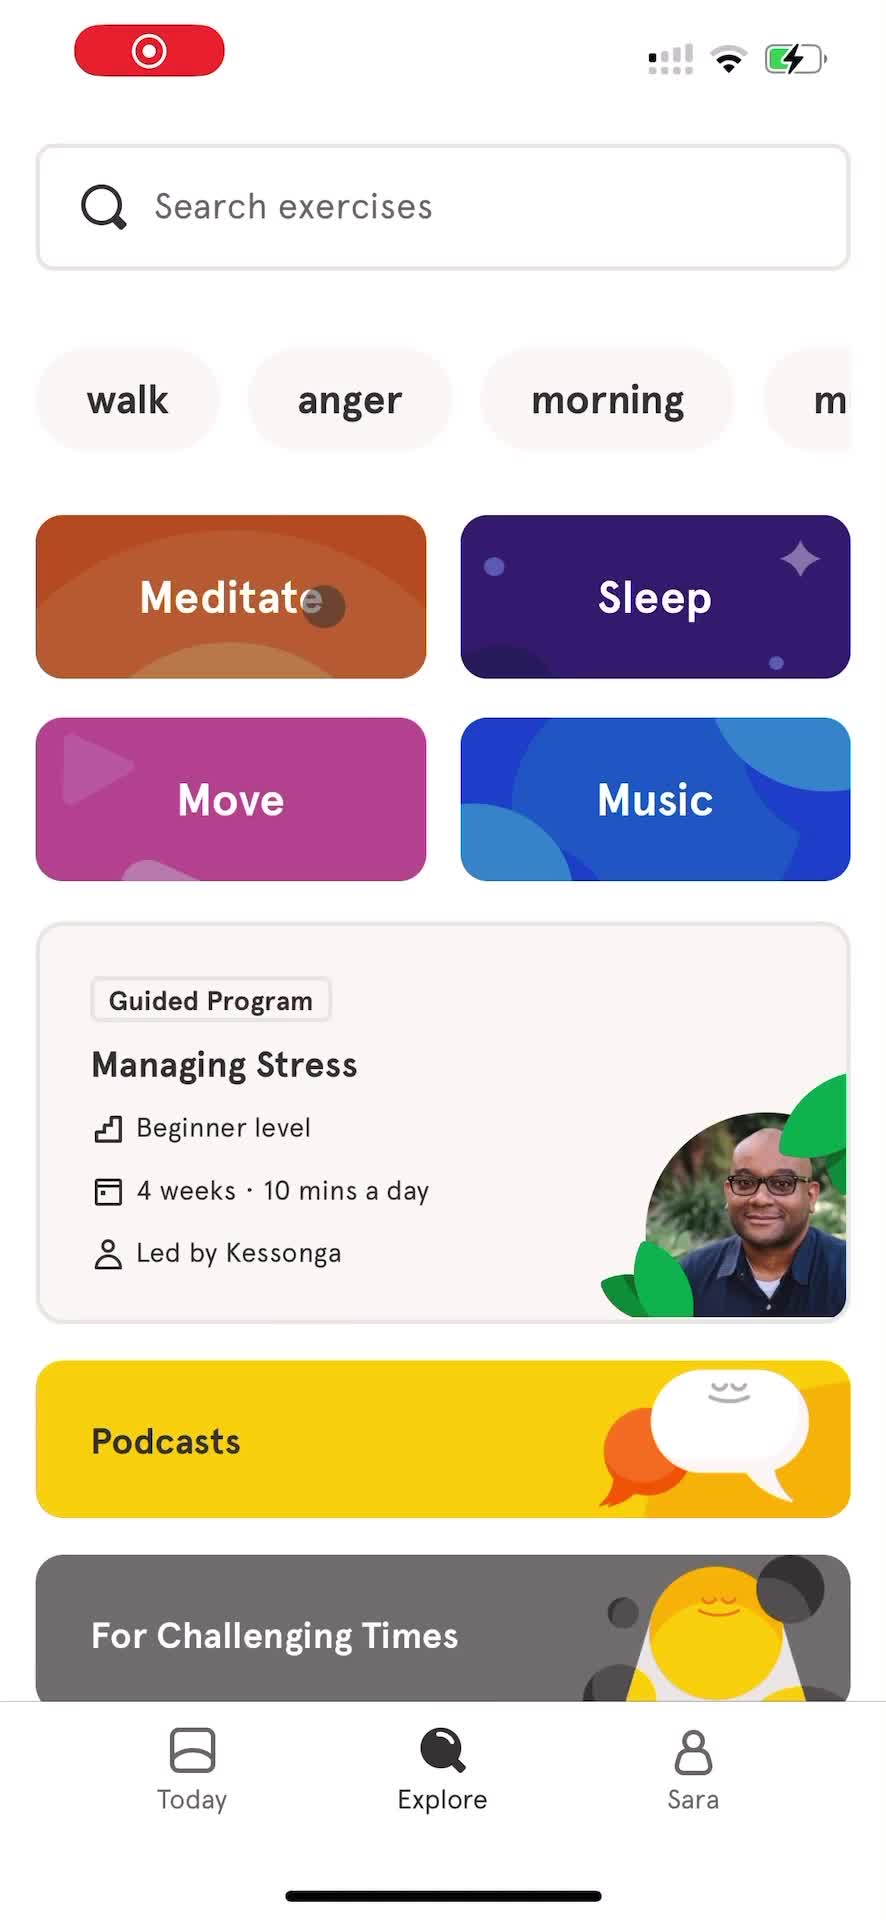 Screenshot of Explore on Meditation on Headspace user flow